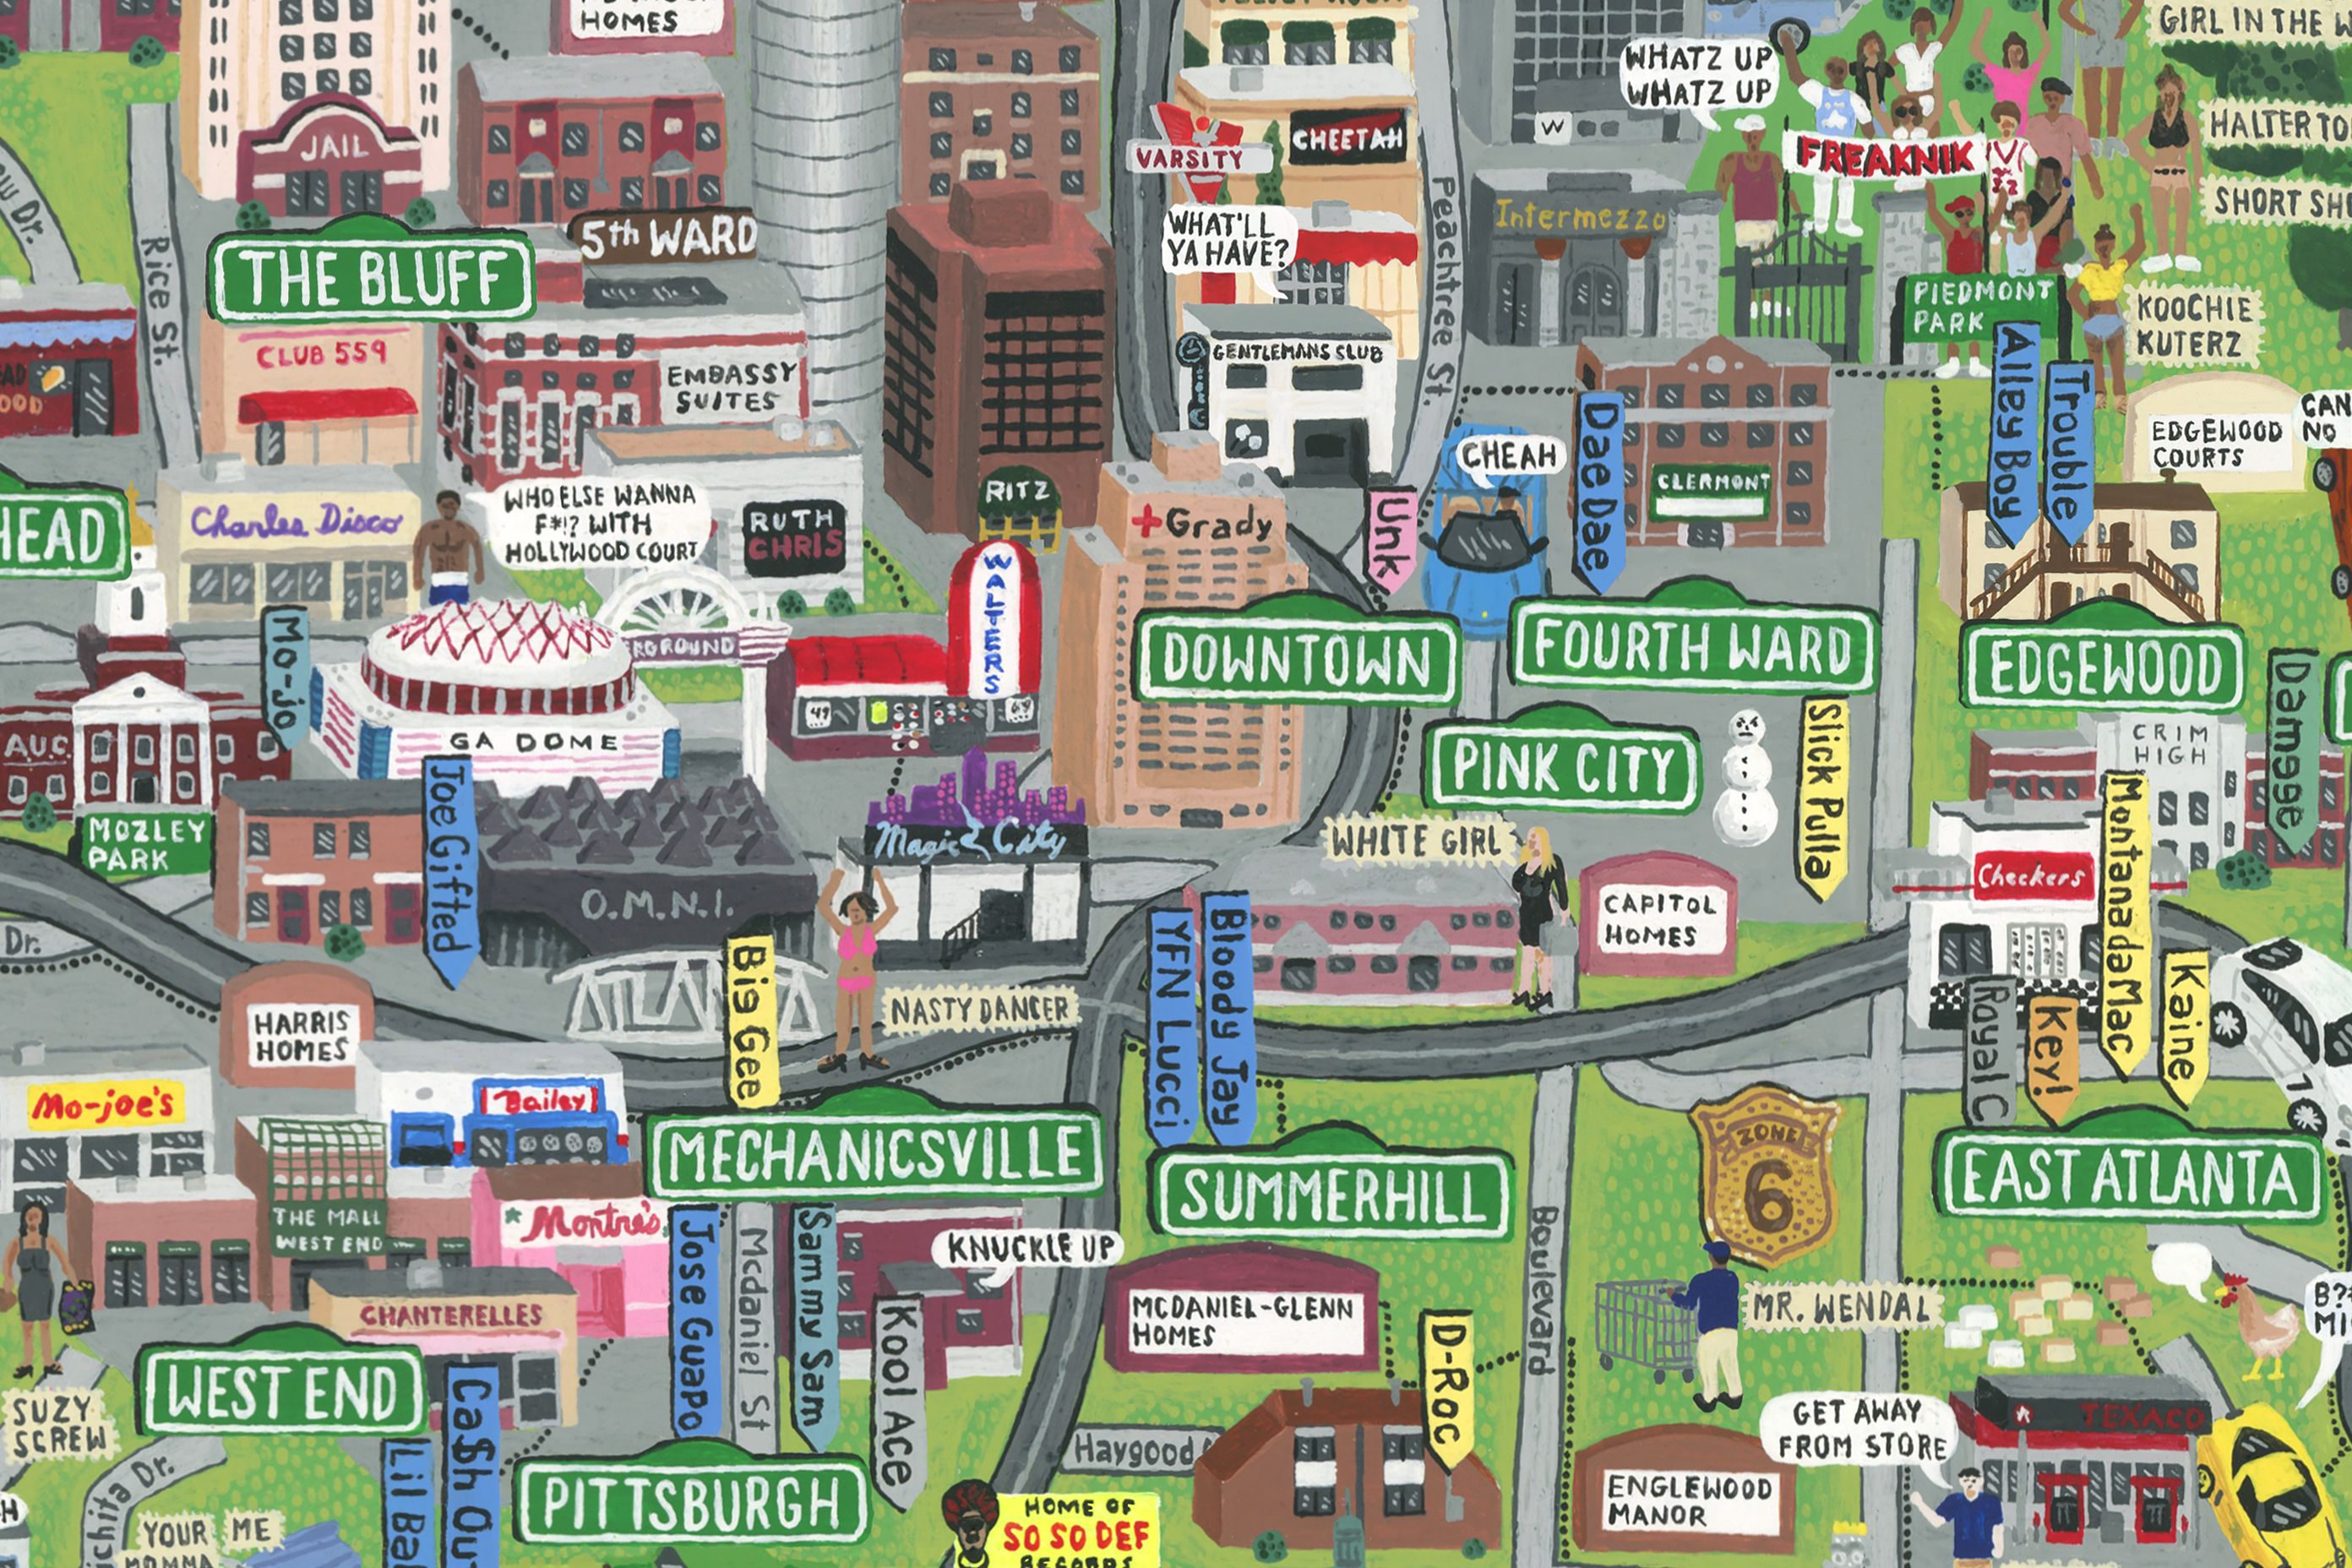 A close-up of a color illustrated map showing famous Atlanta rappers and locations made famous from hip-hop songs